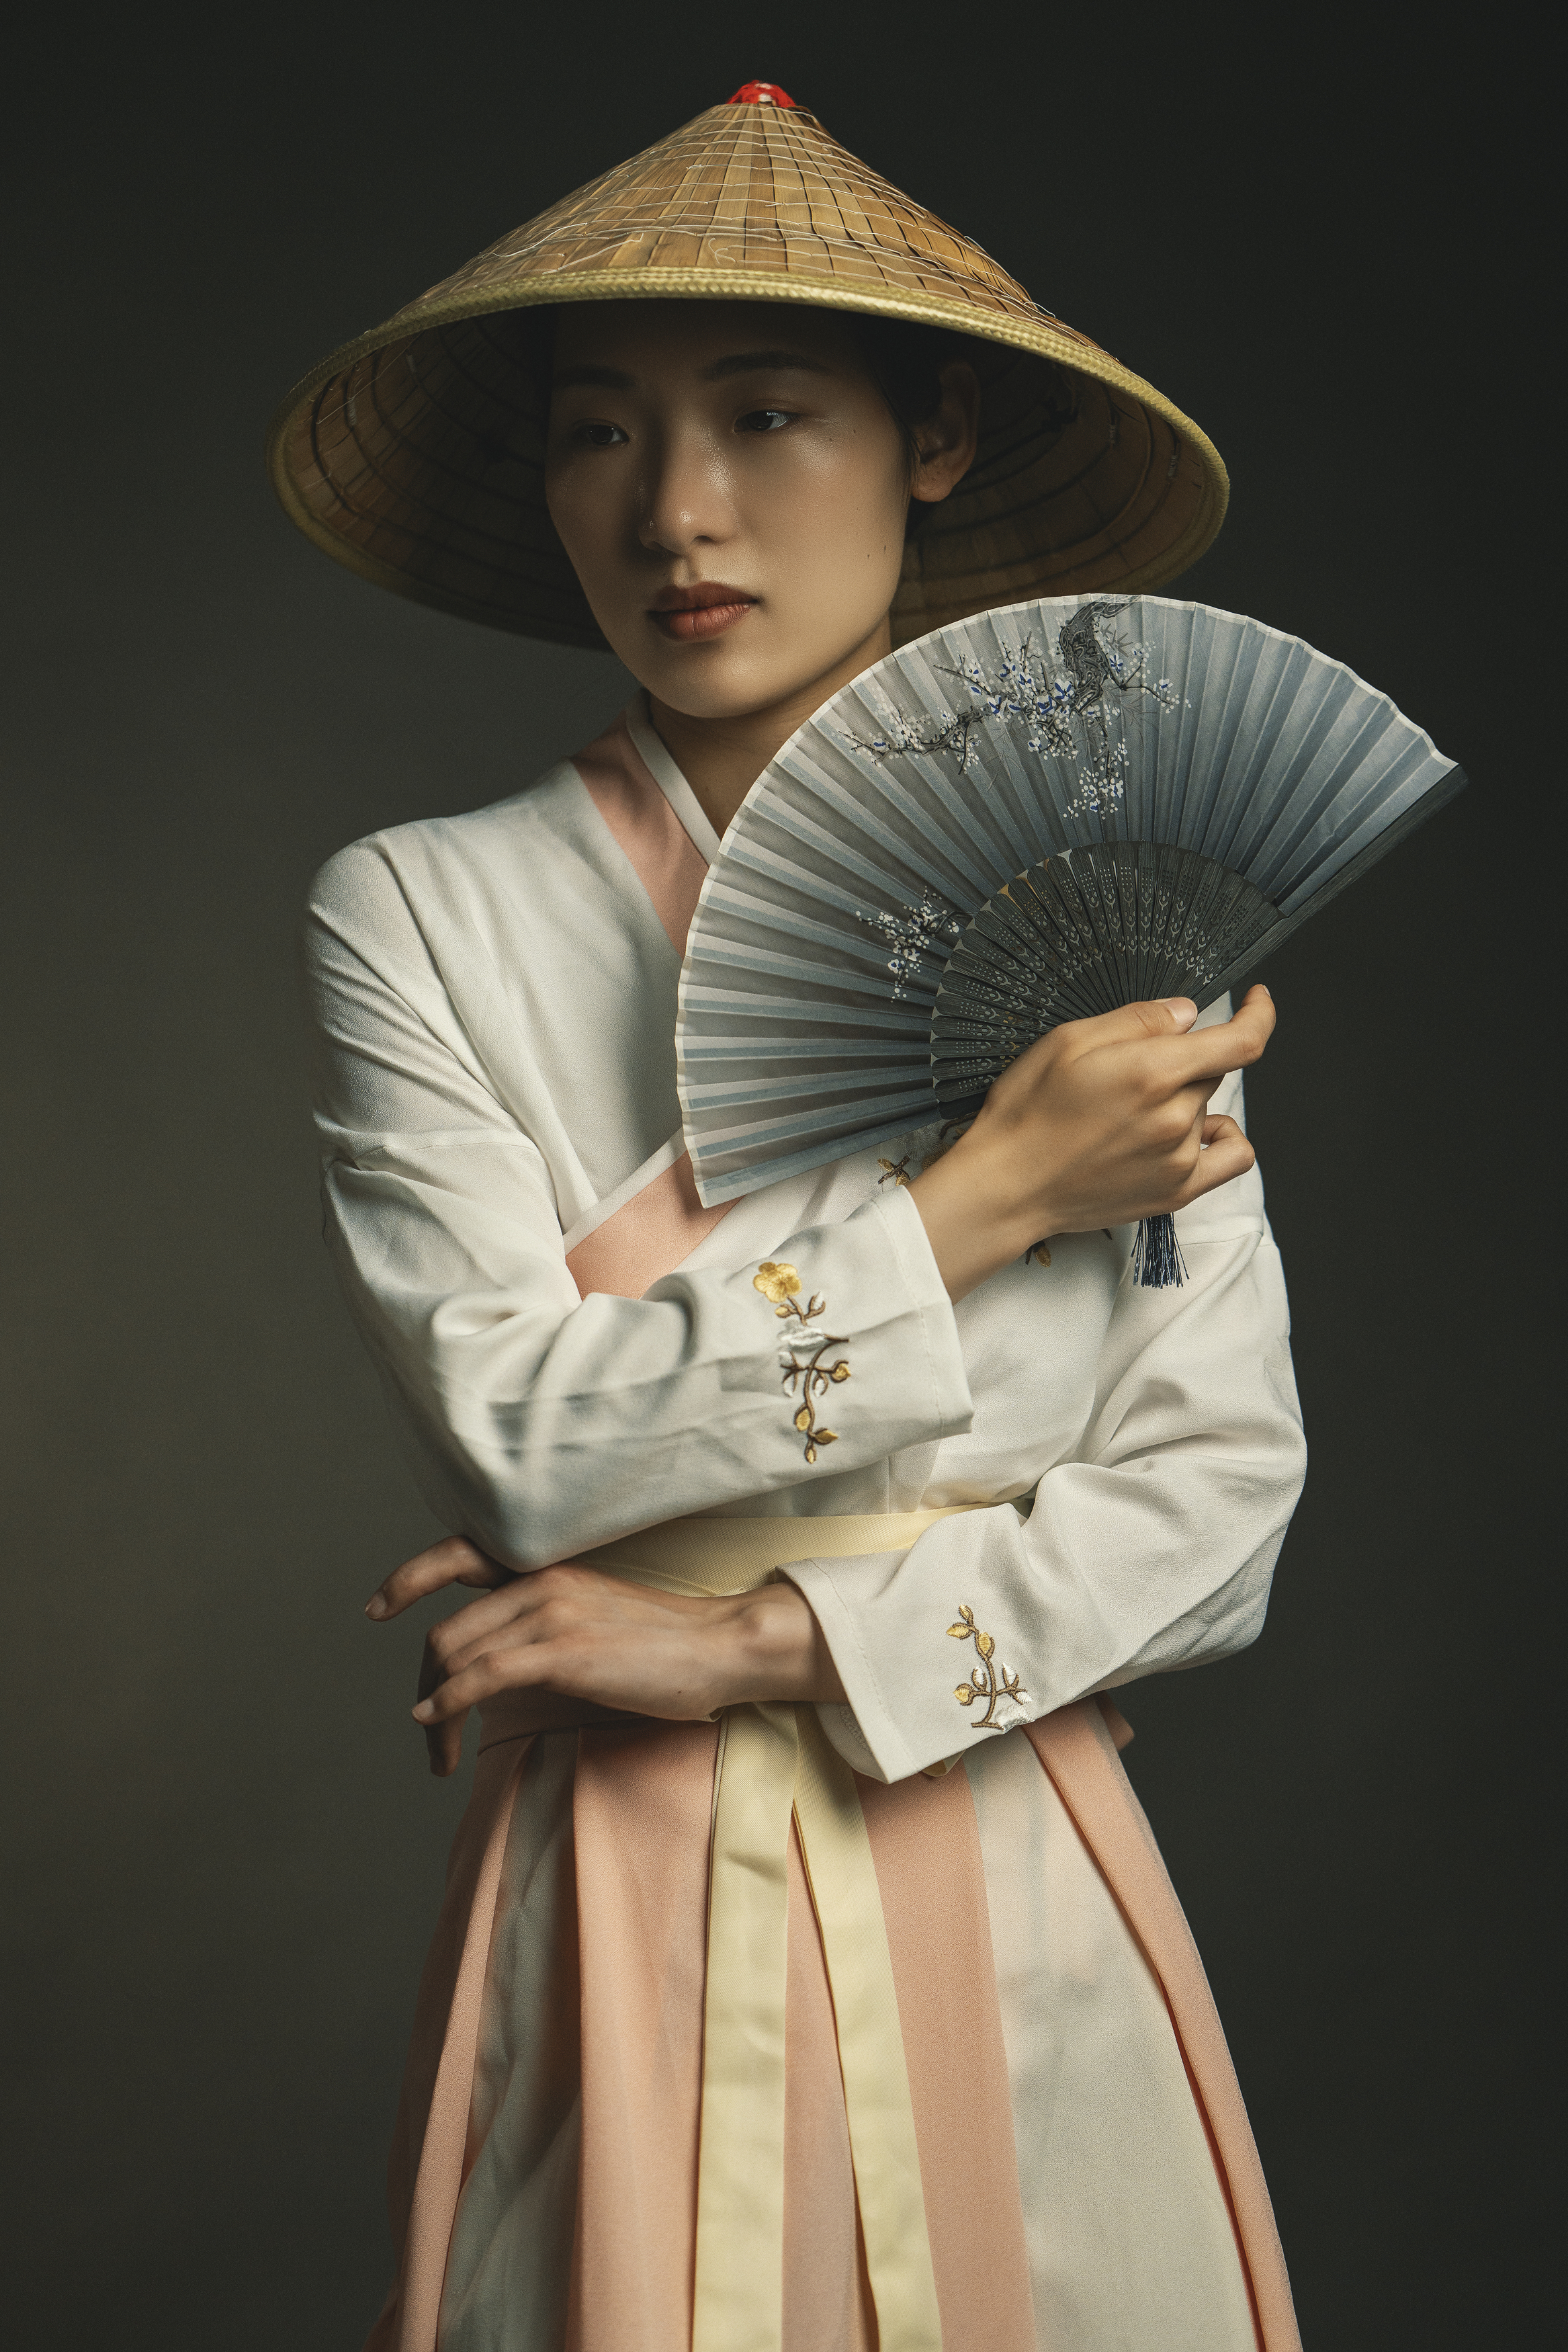 attractive, beauty, chinese girl, dreaminess, dress, elegance, fashion, femininity, front view, grace, hat, individuality, indoors, lifestyles, looking, one person, painted fan, portrait, pose, standing, studio shot, traditional clothing, young woman, Alex Tsarfin